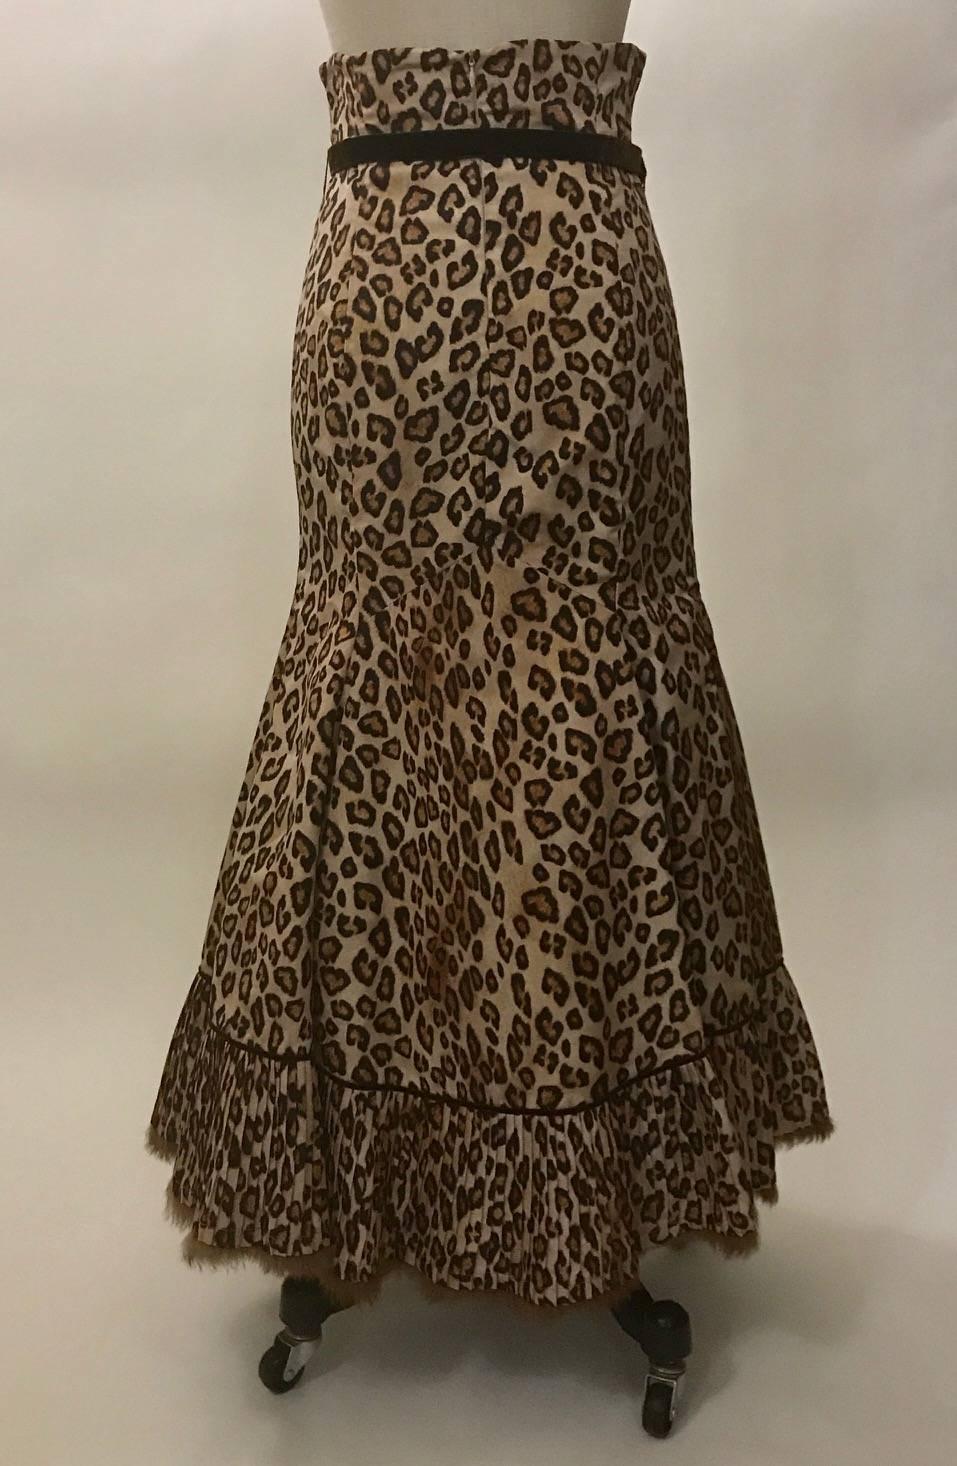 Alexander McQueen leopard midi/maxi skirt from the 2005 Hitchcock inspired collection 'The Man Who Knew Too Much.' Brown velvet trim and pleating at bottom, hem finished with light brown rabbit fur trim. Brown velvet belt. Mesh lining at bottom